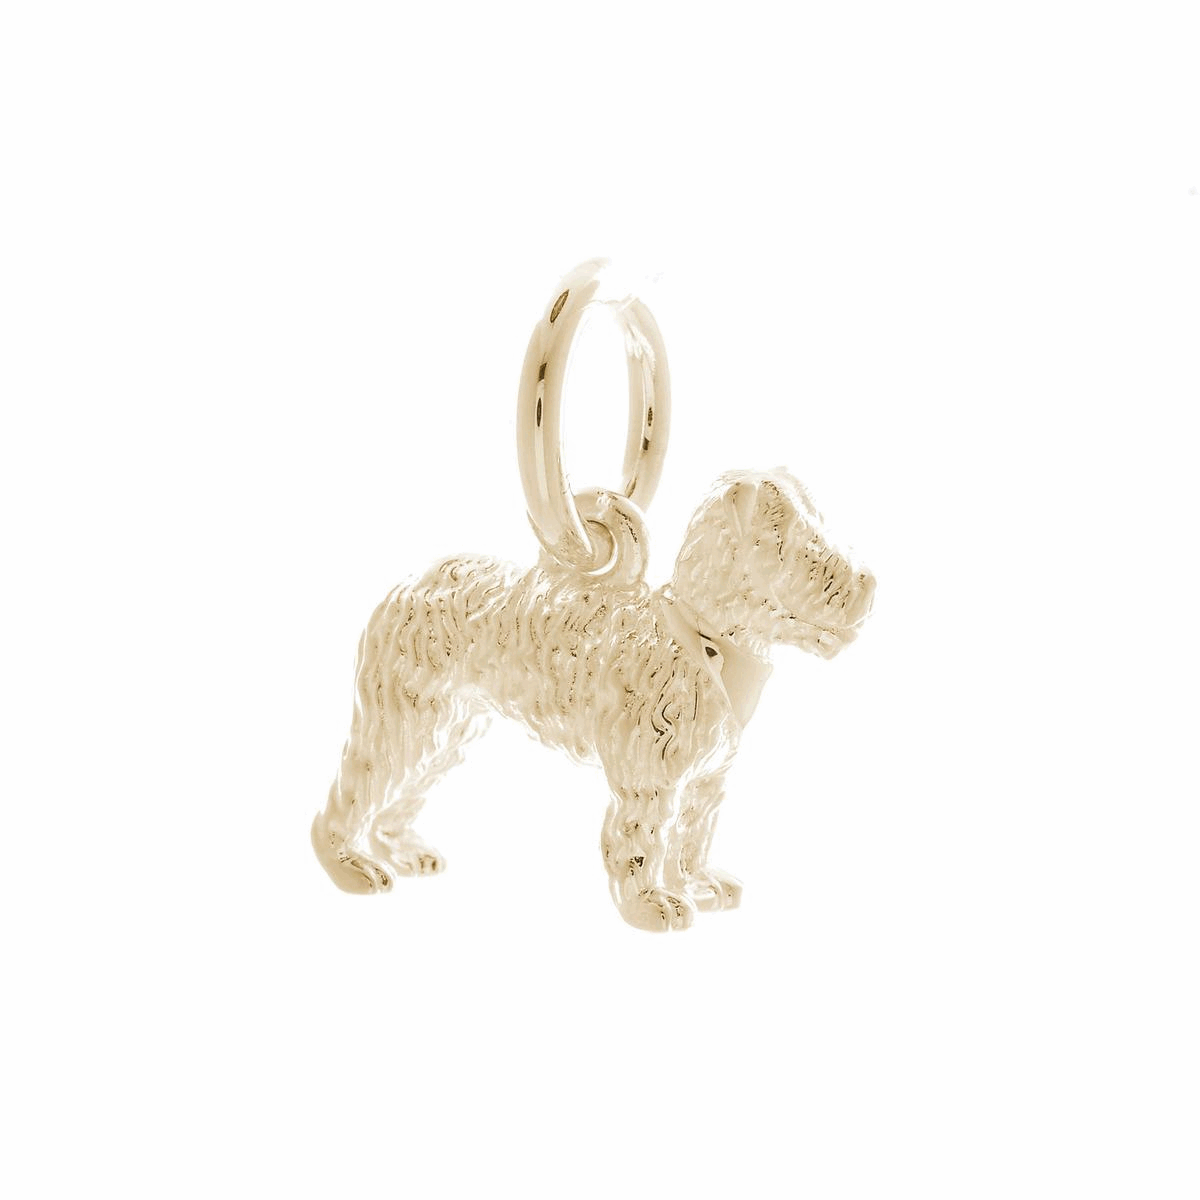 Solid 9ct gold Fox Terrier charm with tiny bandana, perfect for a charm bracelet or necklace.